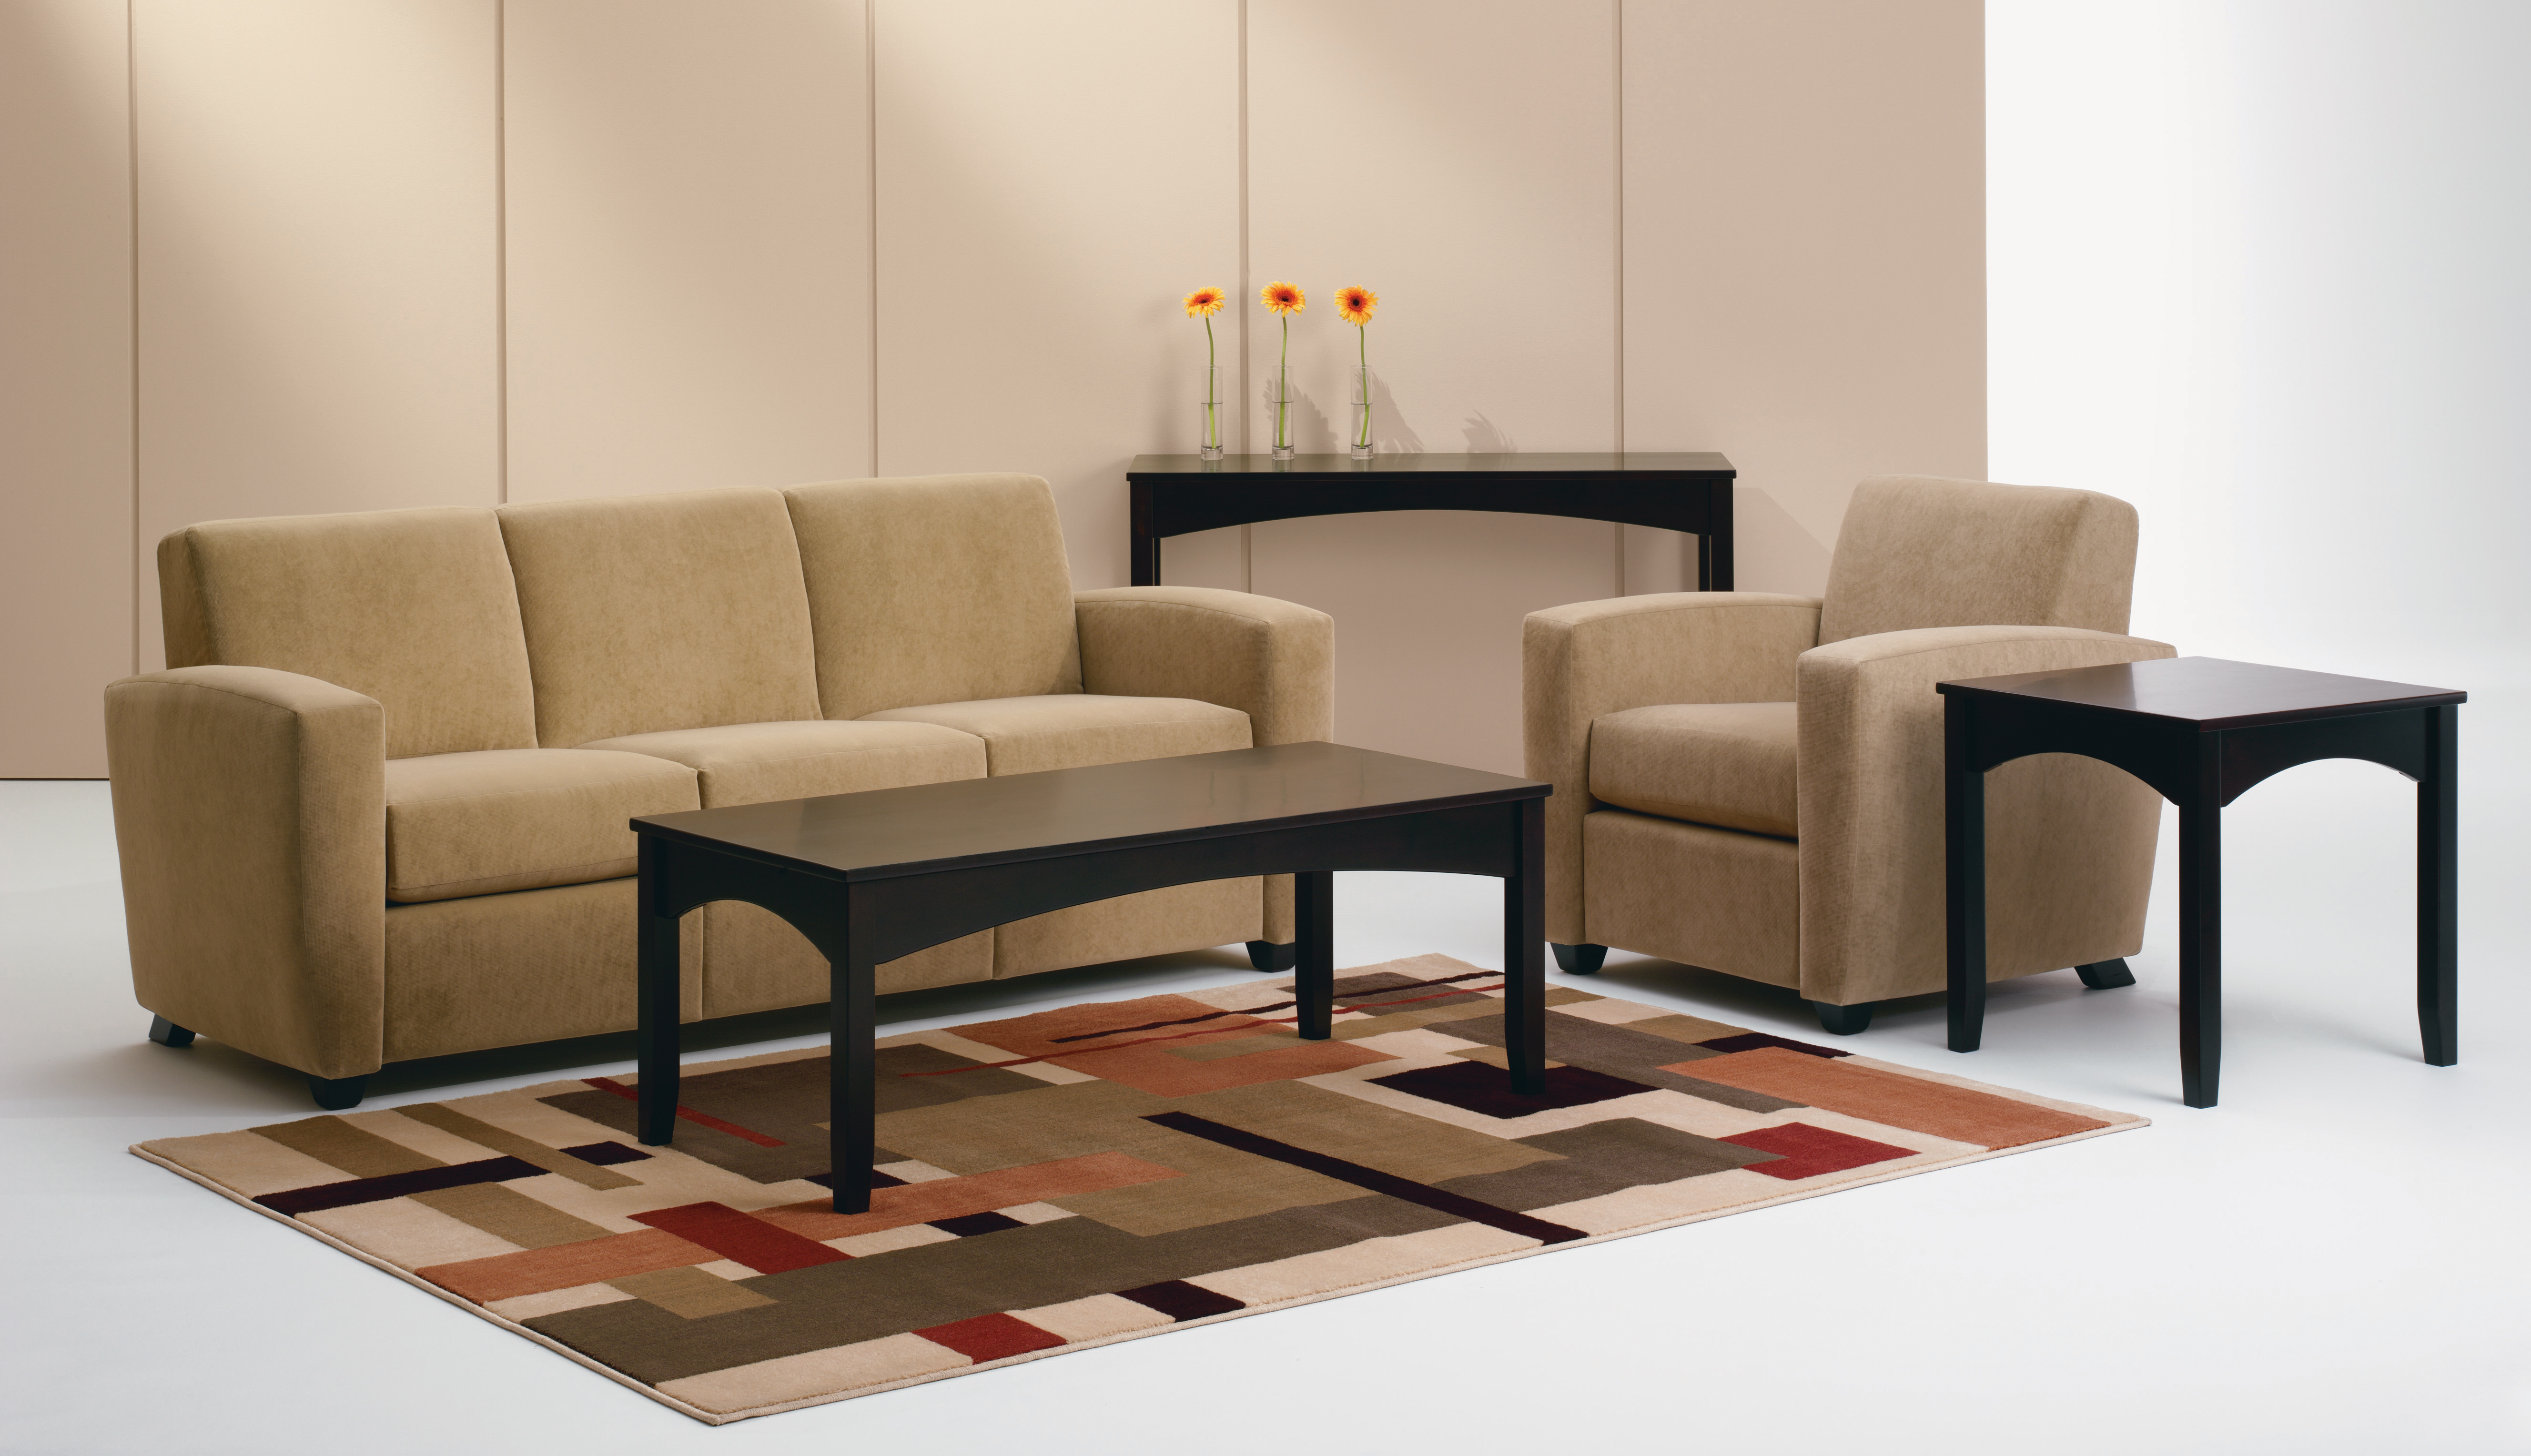 Rendezvous Sofa and Chair with Rendezvous Tables